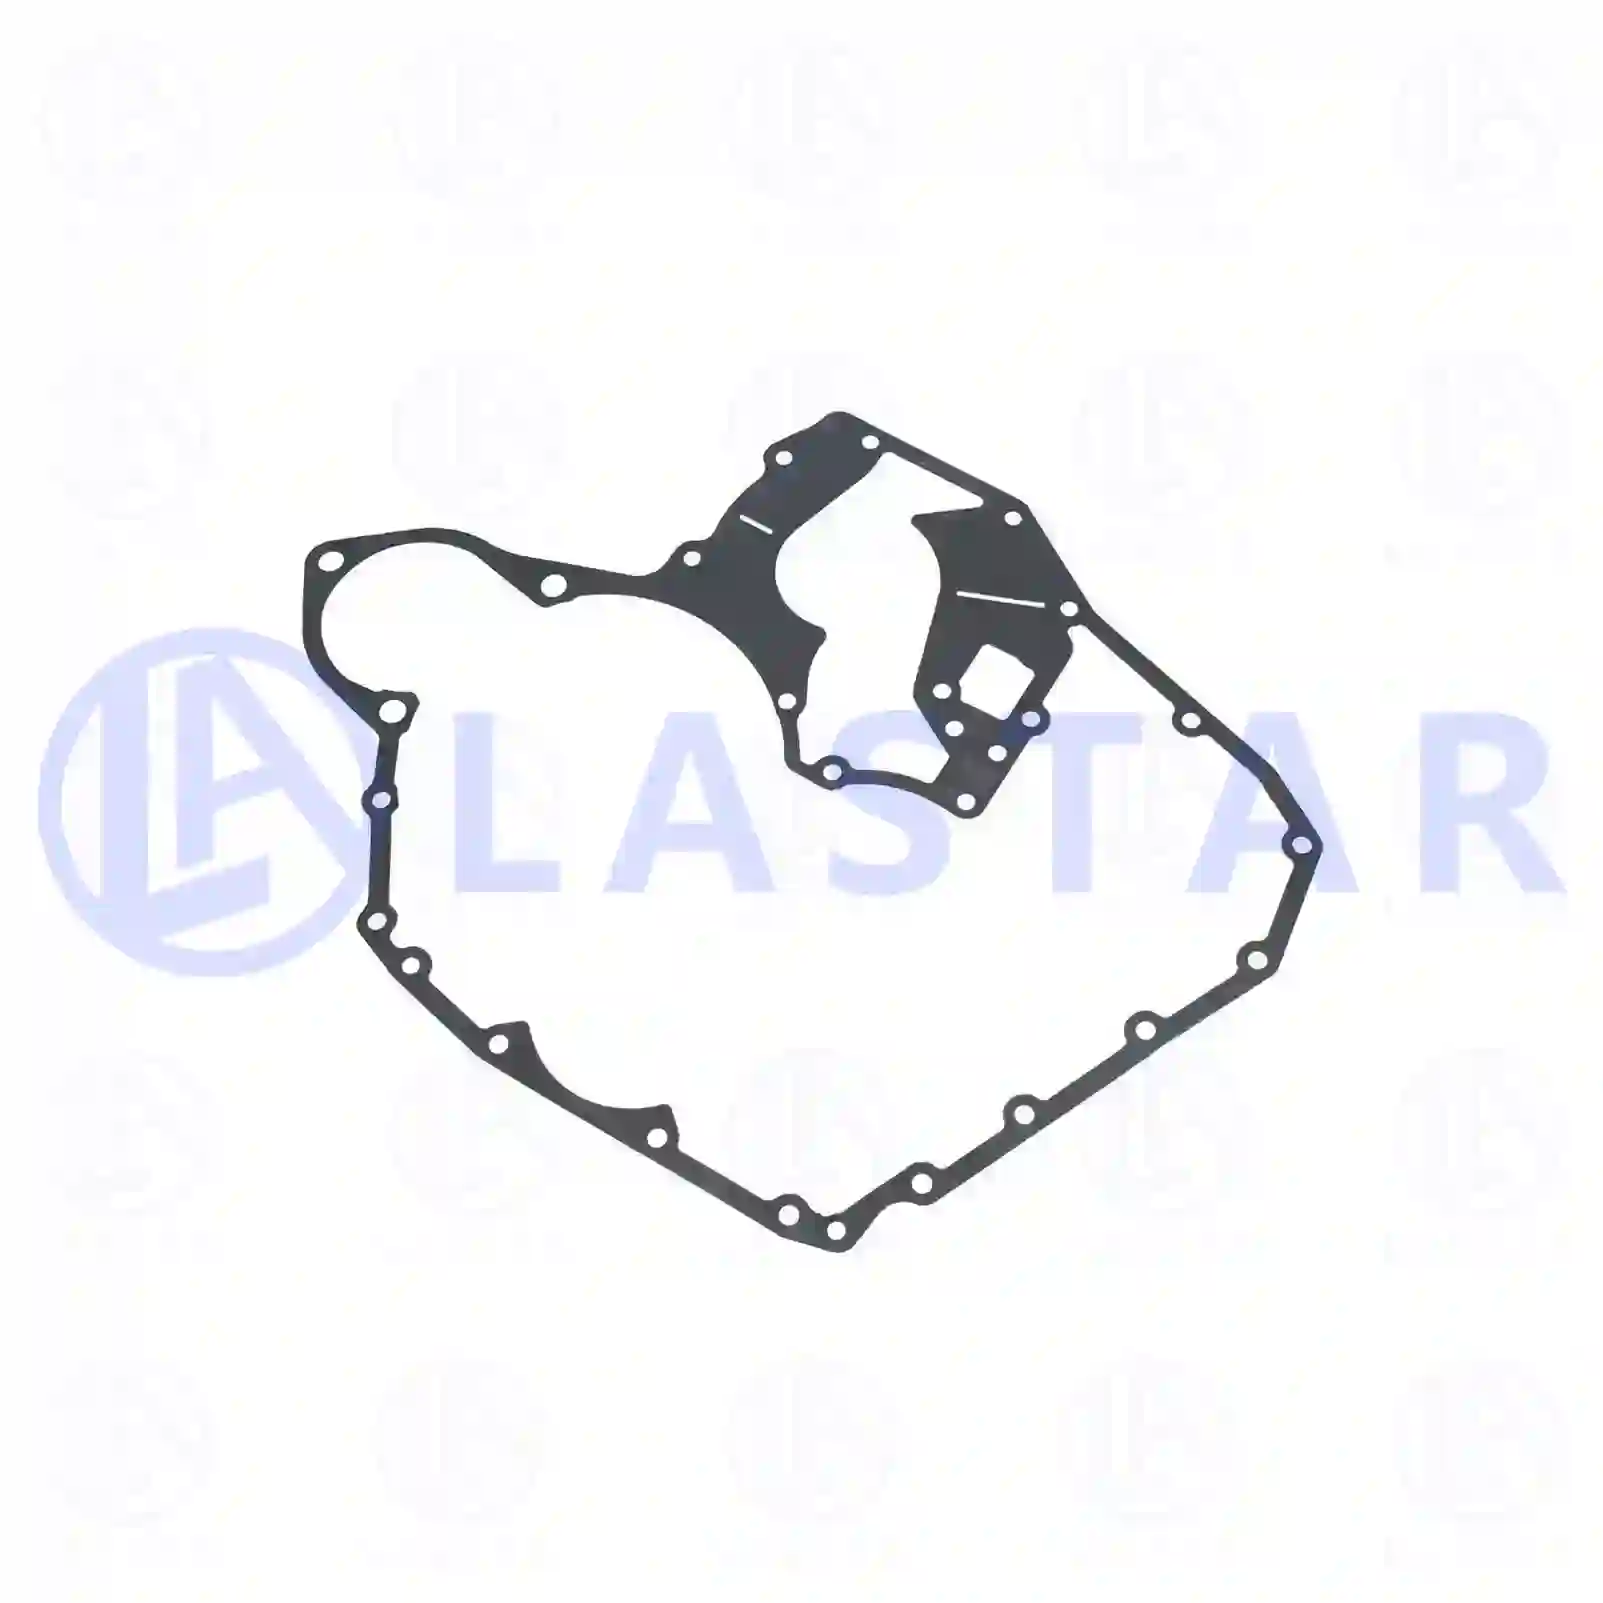 Gasket, timing case cover, 77703657, 51019030322 ||  77703657 Lastar Spare Part | Truck Spare Parts, Auotomotive Spare Parts Gasket, timing case cover, 77703657, 51019030322 ||  77703657 Lastar Spare Part | Truck Spare Parts, Auotomotive Spare Parts